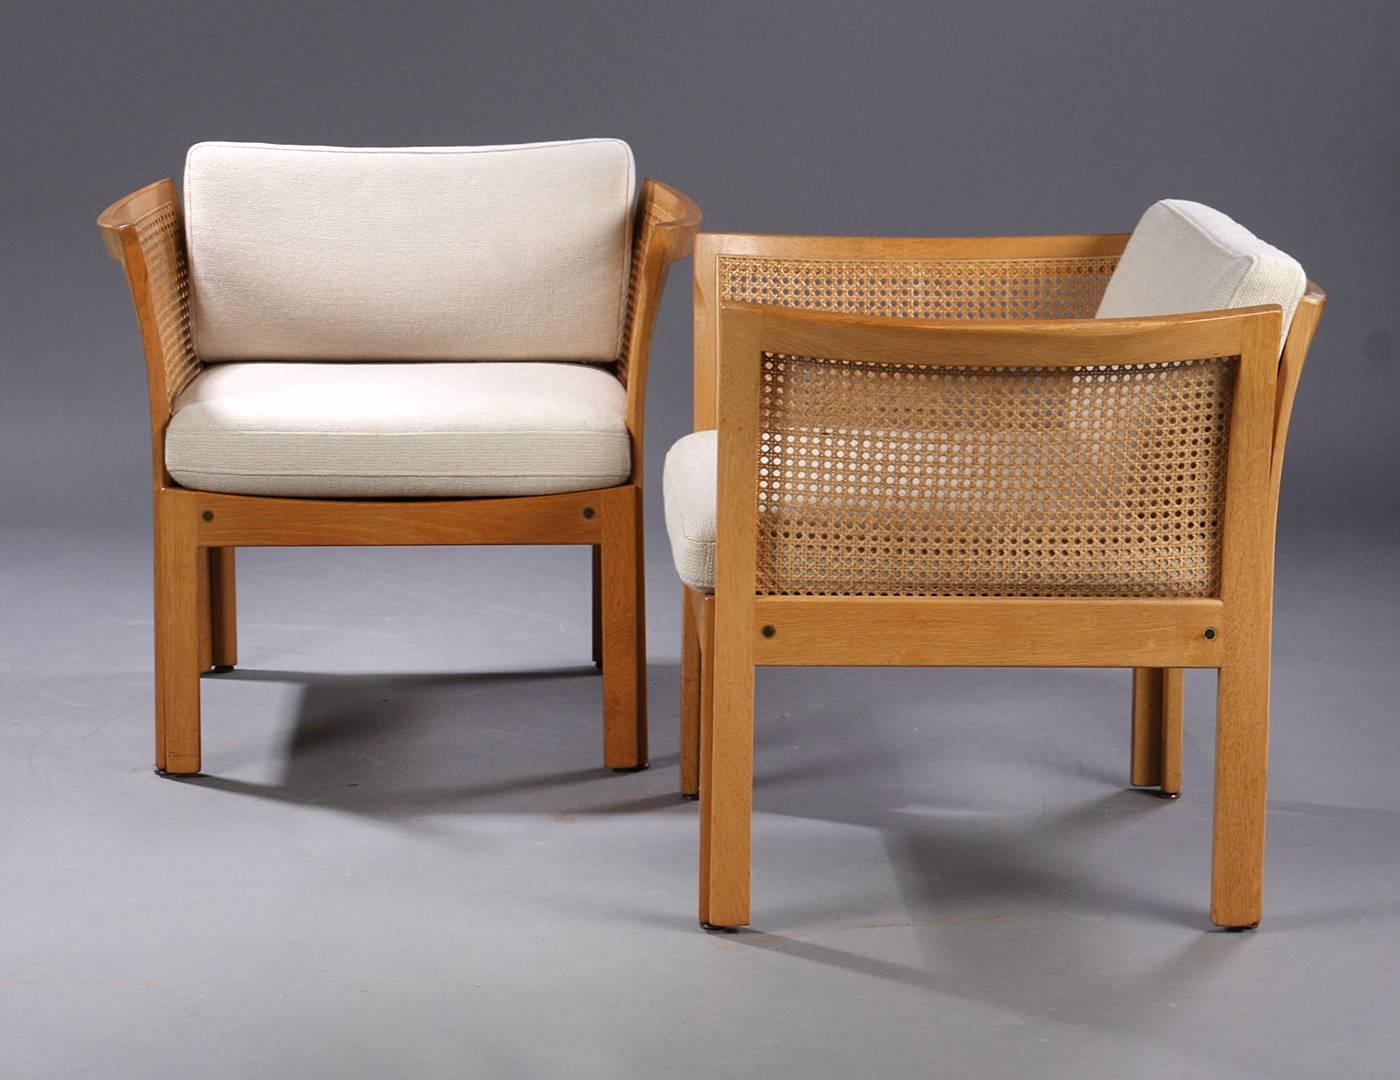 The plexus armchair series was designed by Illum Wikkelsø in the 1960s and producend by CFC Silkeborg.

The armchairs are in good condition and features a frame in oak and fabric upholstery.

The Plexus series is designed to be taken apart making it